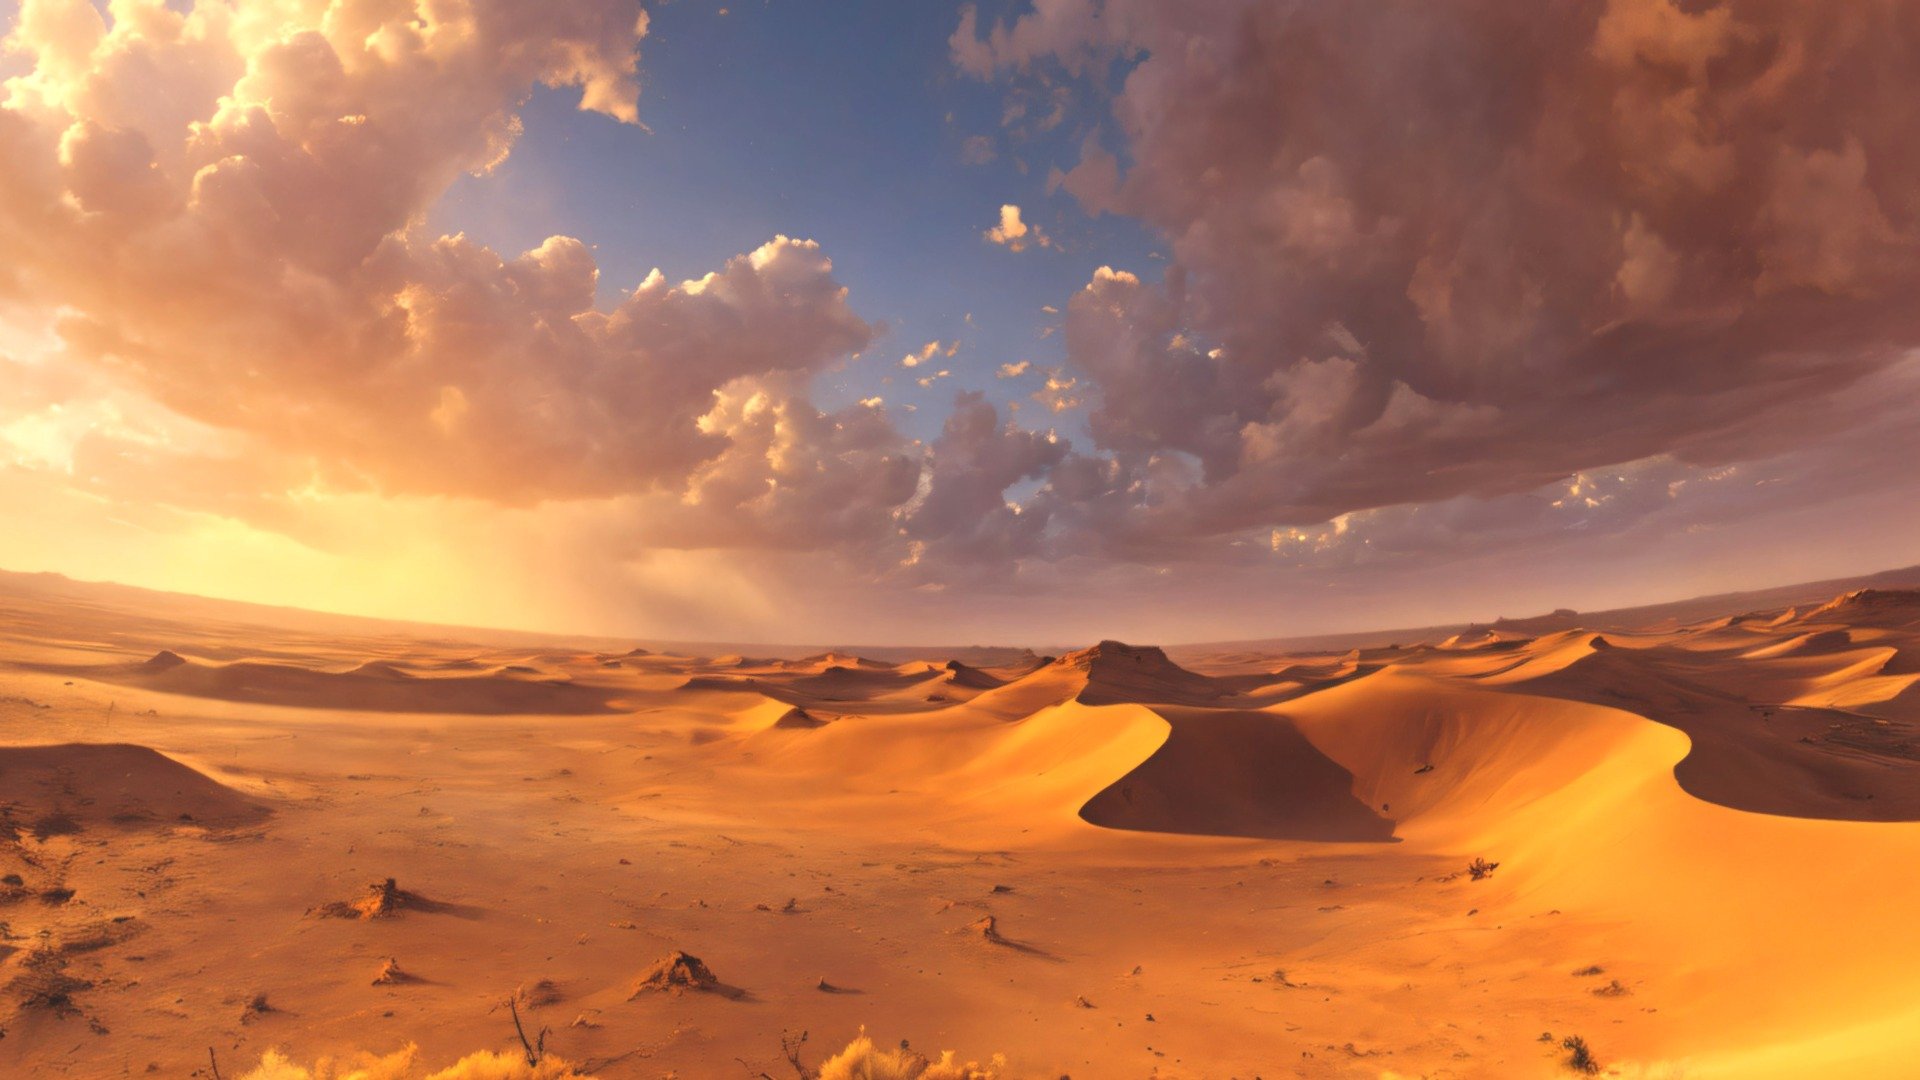 This is an 8k resolution (8192 x 4096) HDRI equirectangular panorama which will help you create 360 degrees Post-Apocalyptic Desert background in different 3d software (Blender, Unreal Engine, Unity, 3dMax and many others). It is perfect for games, virtual reality, 3d renders, movies etc. The image was created with AI and edited in different 2d and 3d software to improve quality, remove seams and make it perfect for any 3d or 2d Post-Apocalyptic Desert project.

The image comes in 2 formats: .hdr and .jpg - HDRI Post-Apocalyptic Desert Panorama A - Buy Royalty Free 3D model by Ionut81 3d model